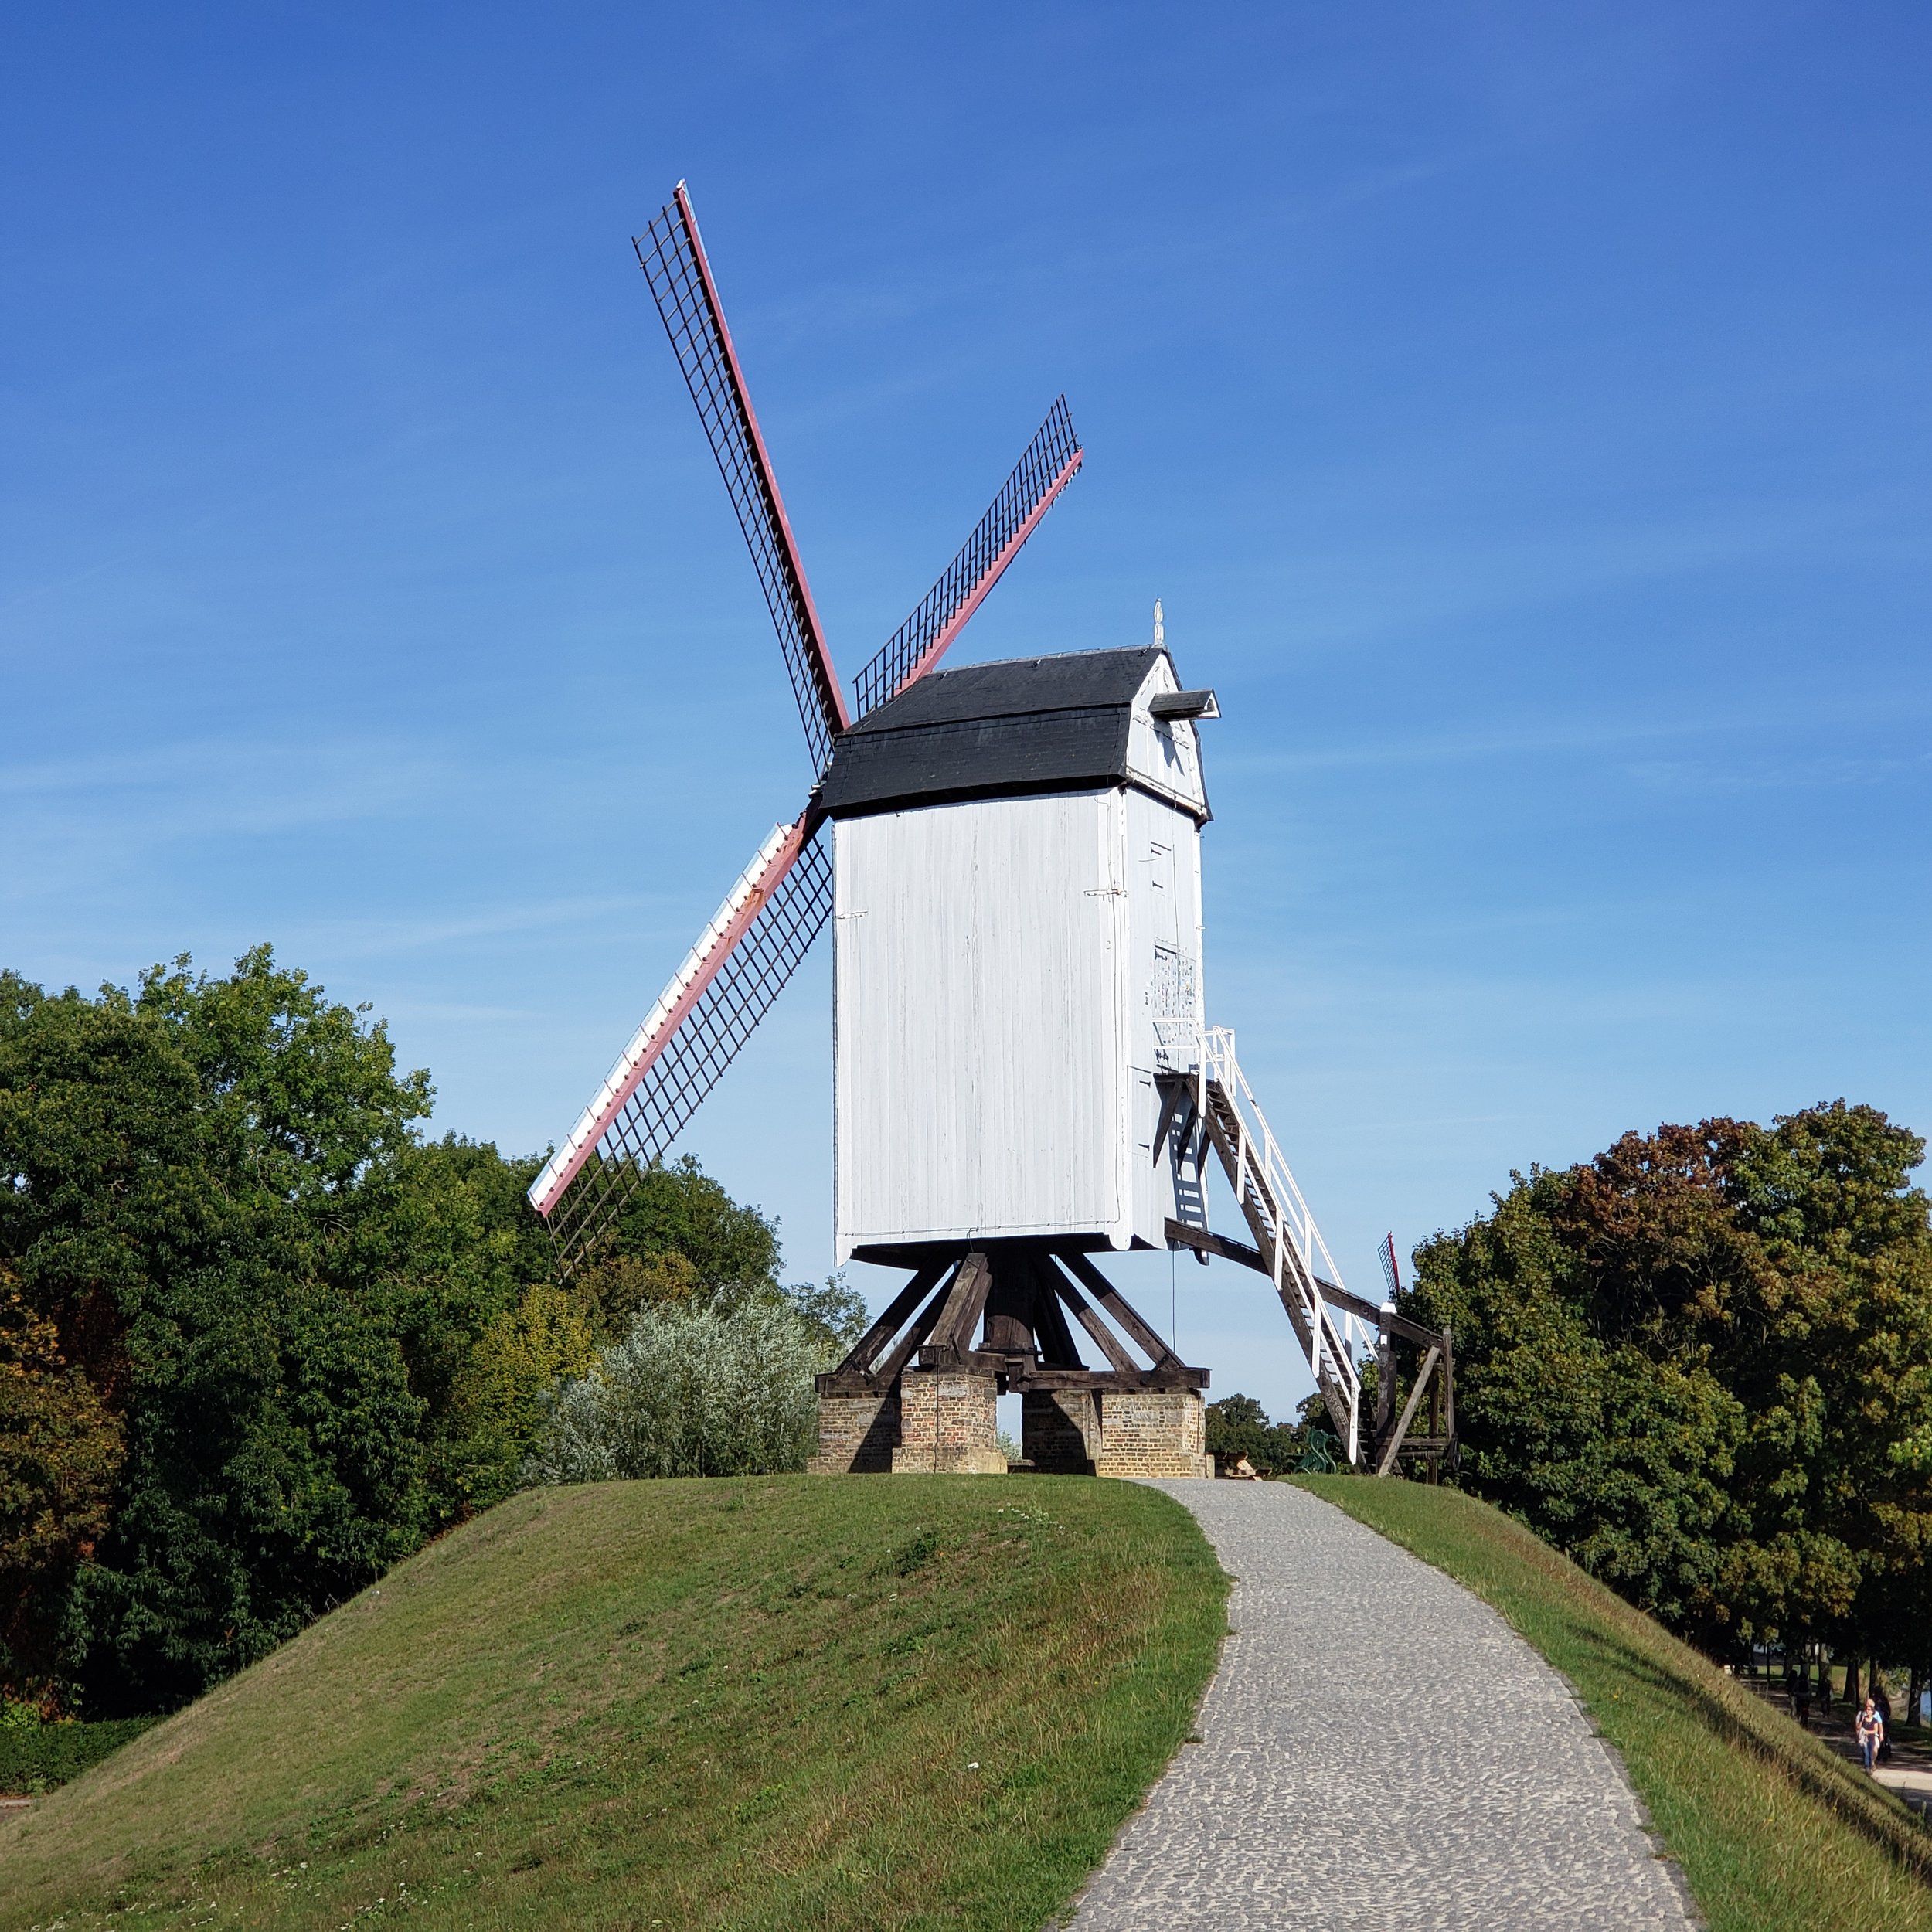  One of the windmills along the canal 